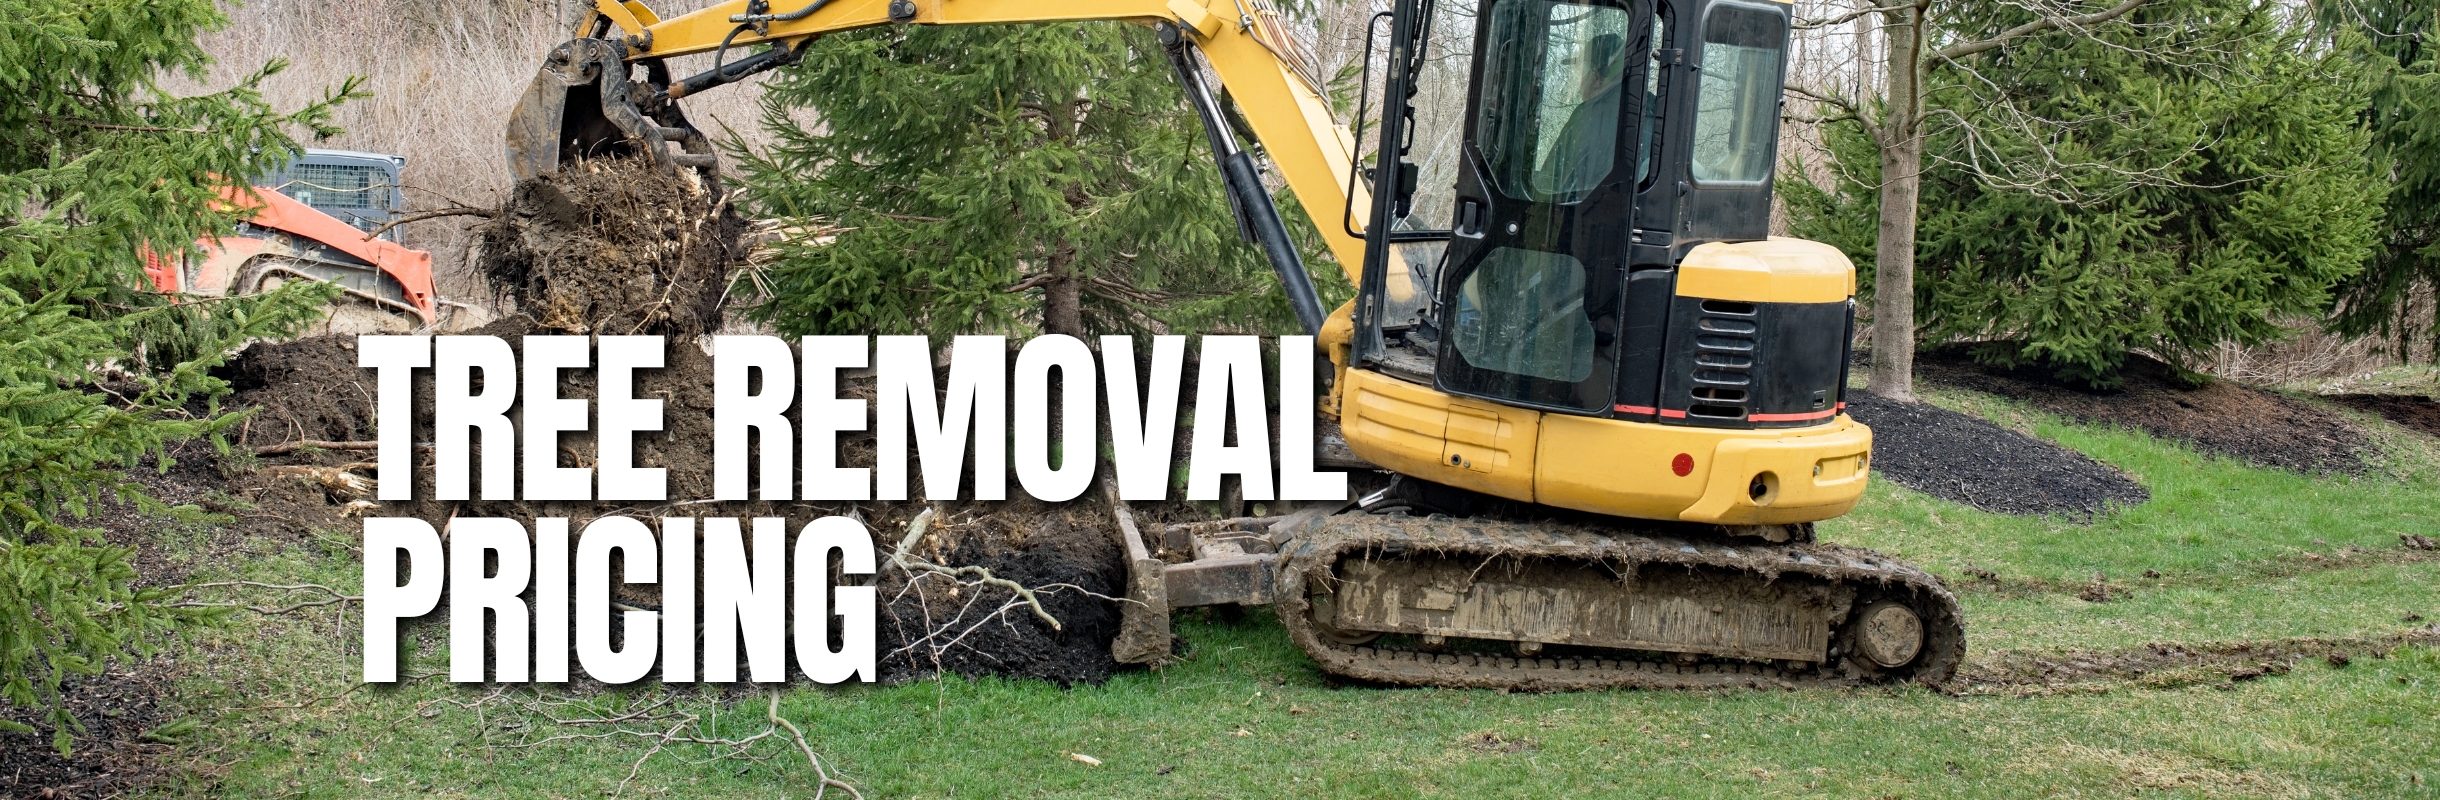 Tree-Removal-Pricing